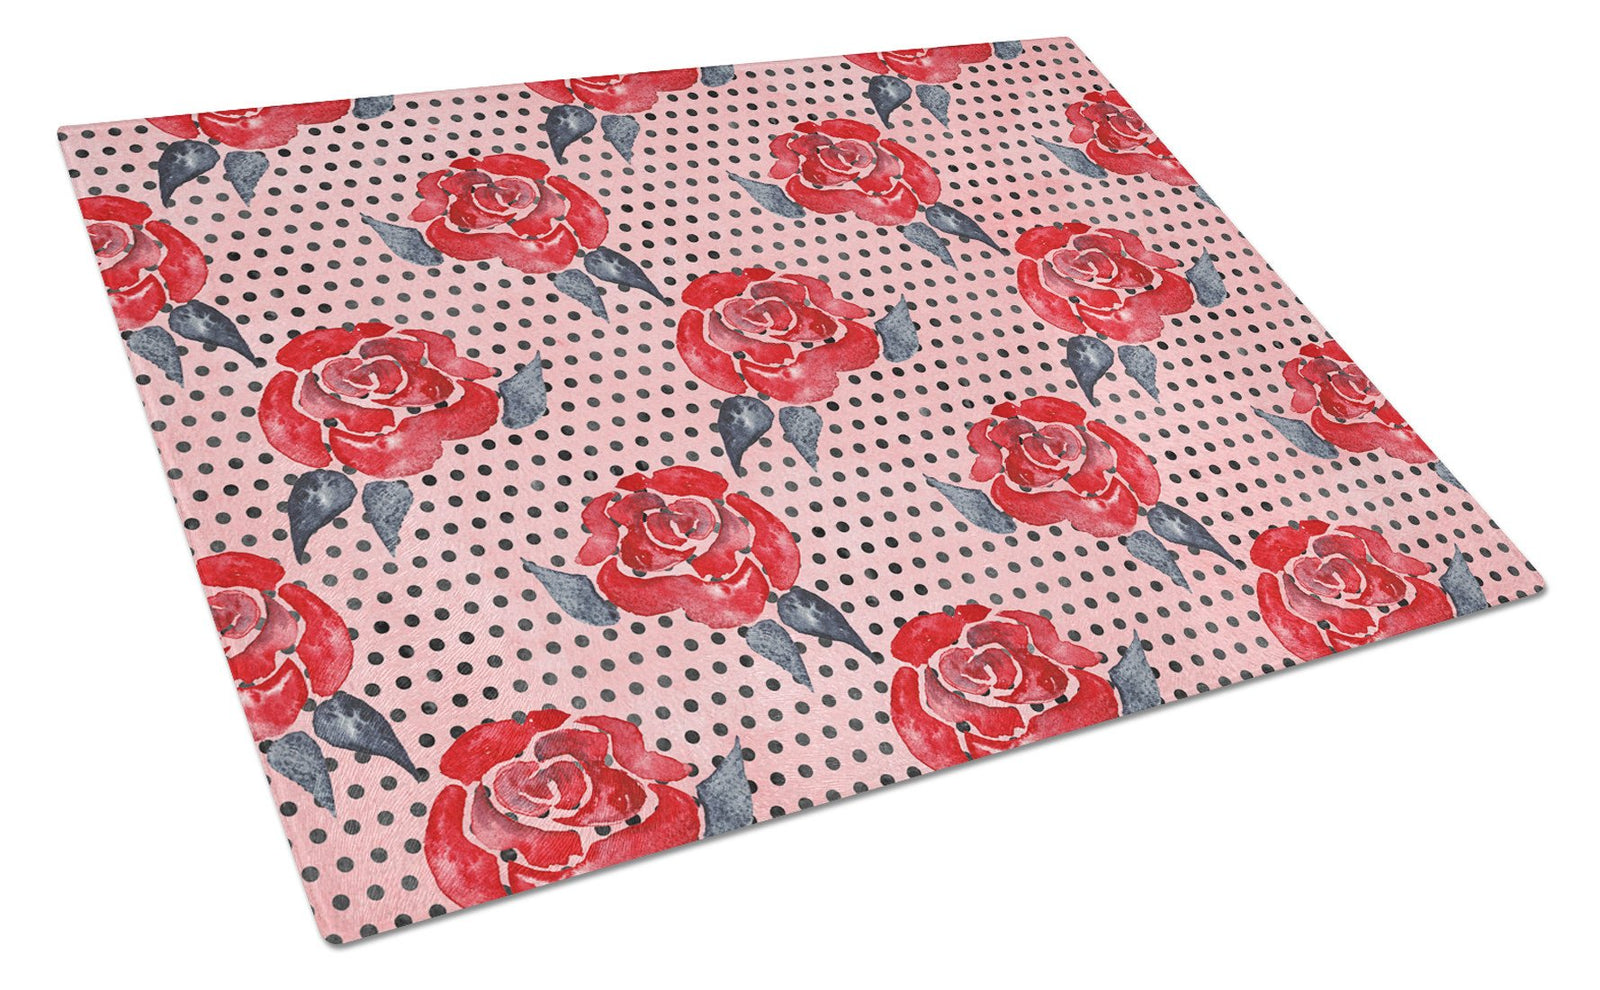 Watercolor Red Roses and Polkadots Glass Cutting Board Large BB7513LCB by Caroline's Treasures